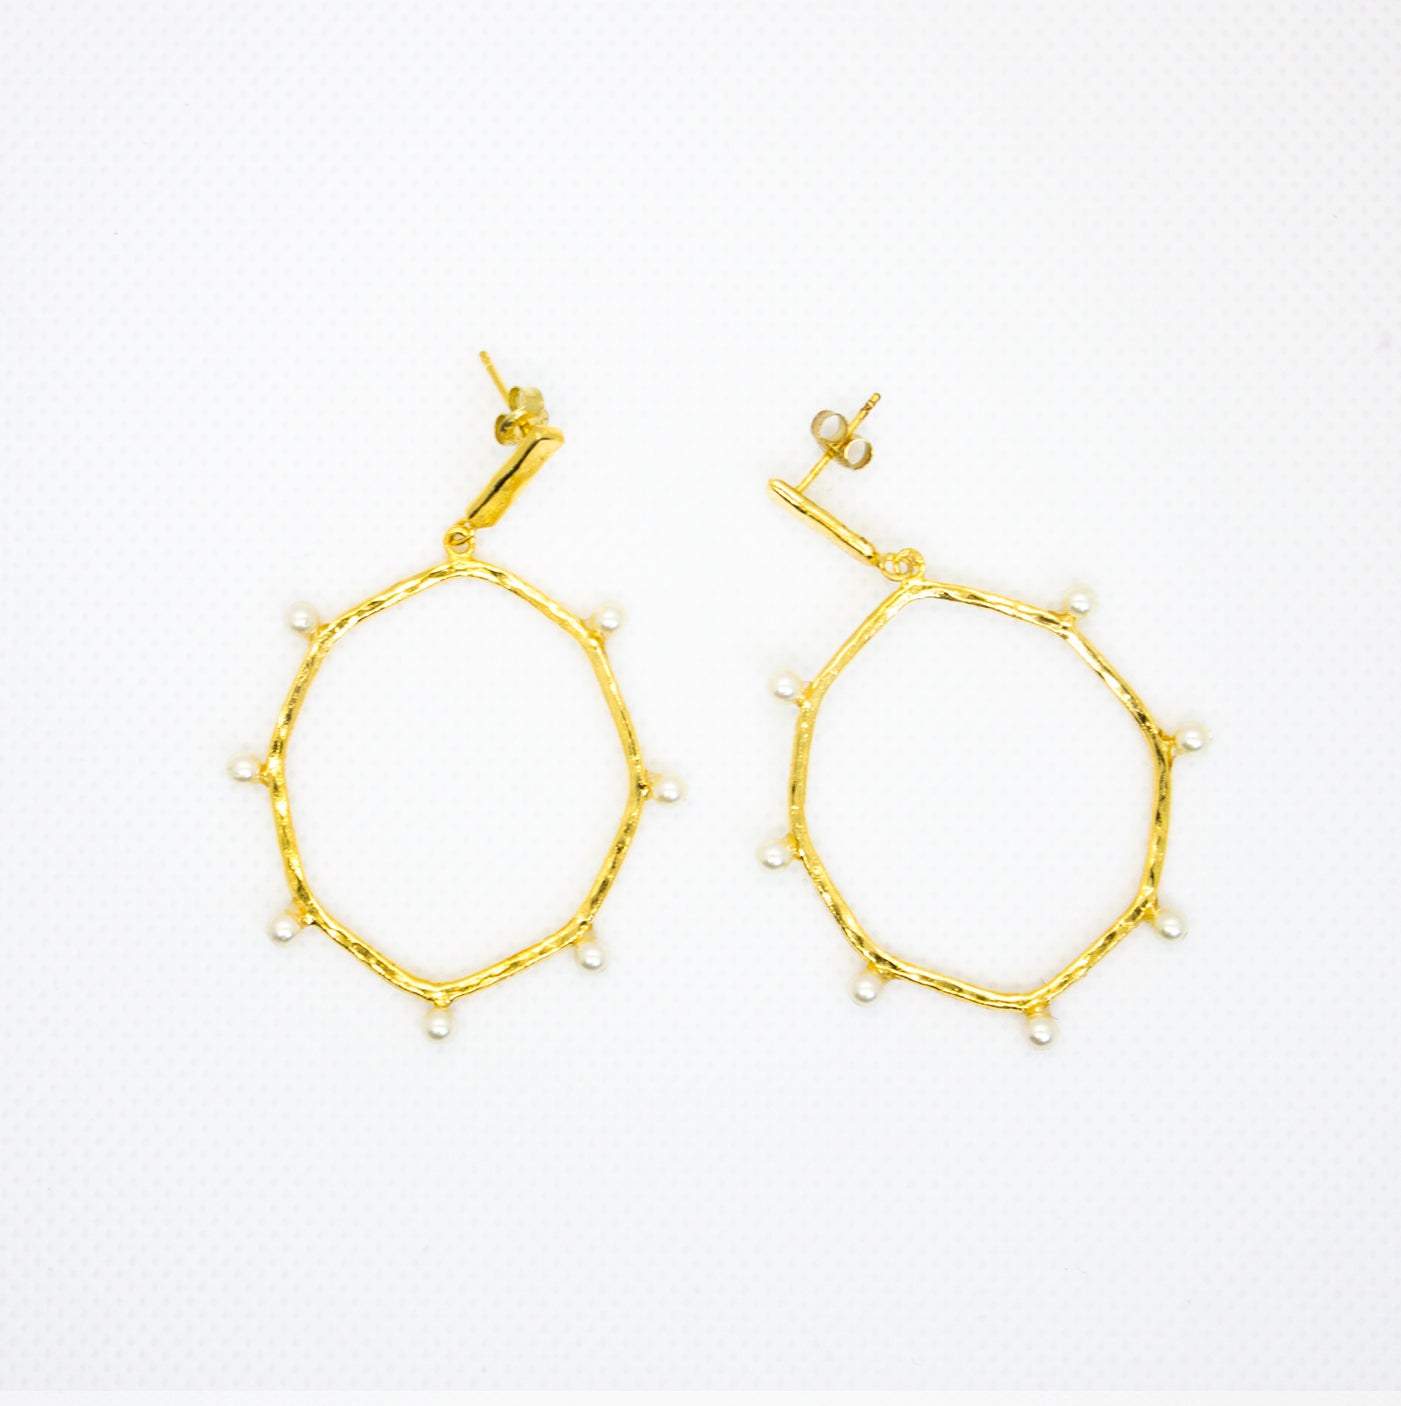 Earrings with Oval Hoops and Small Pearls